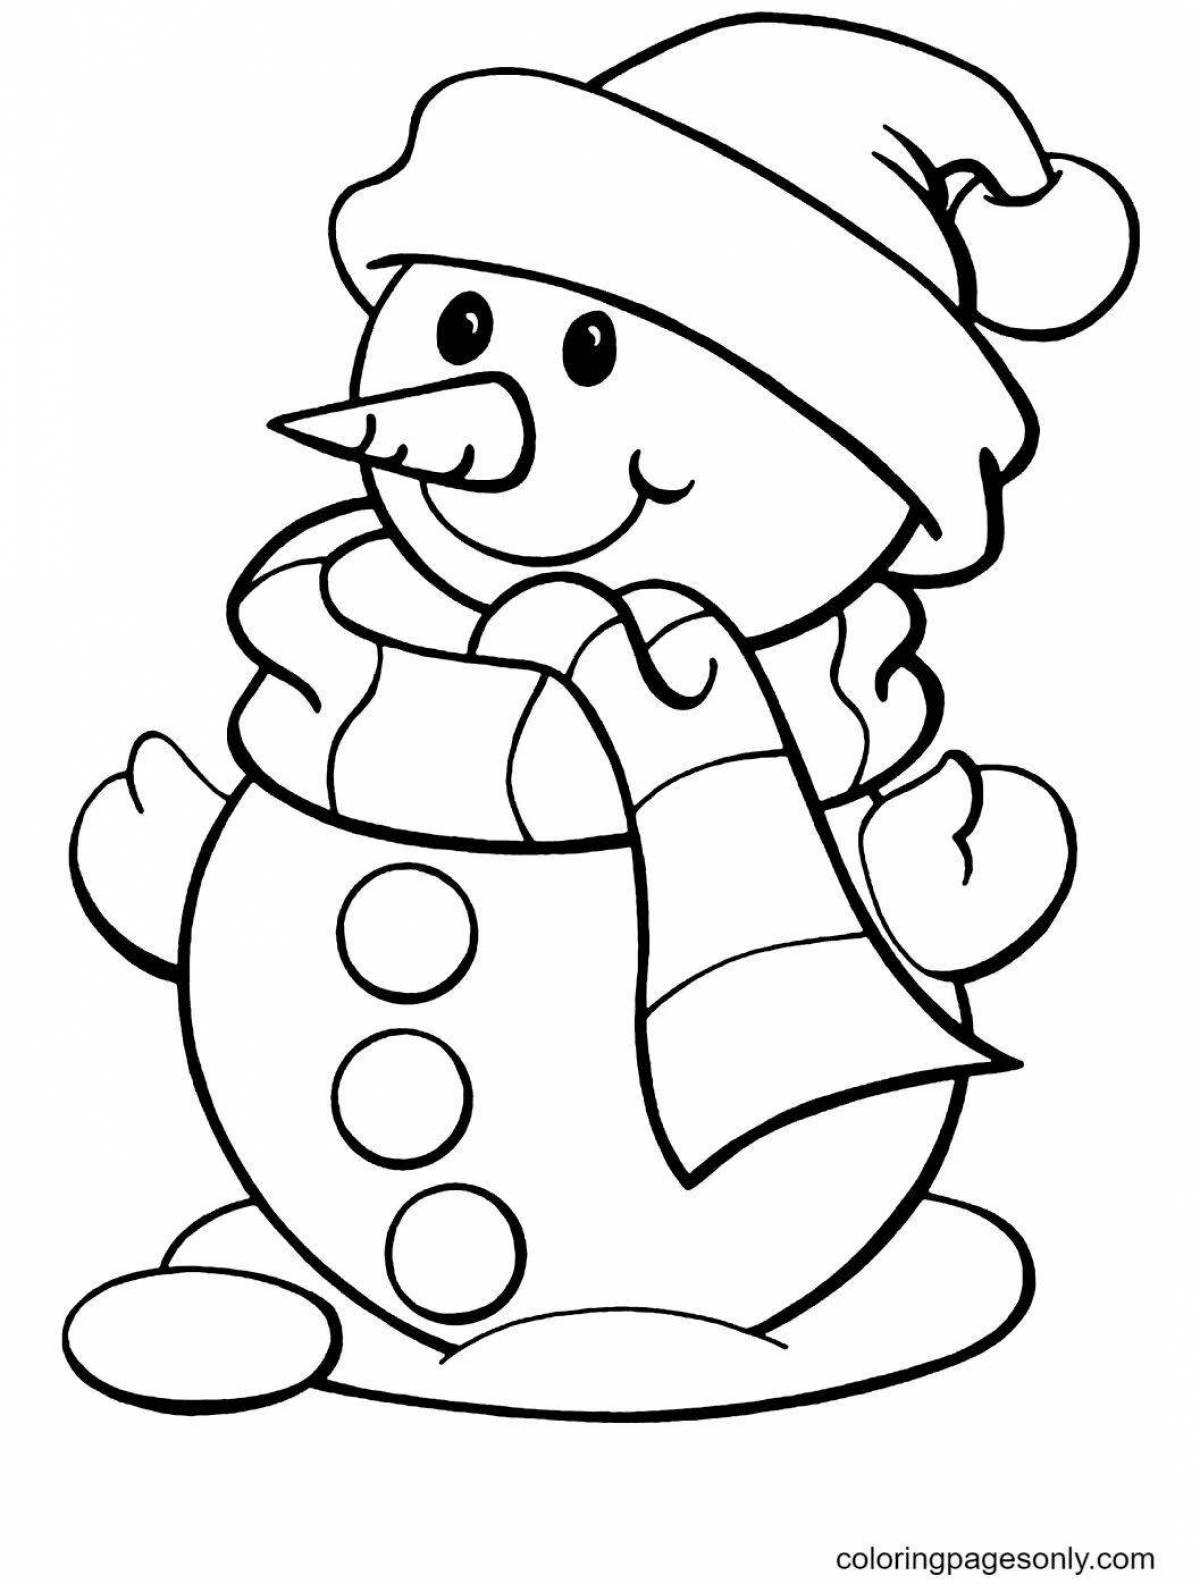 Awesome snowman coloring book for kids 2 3